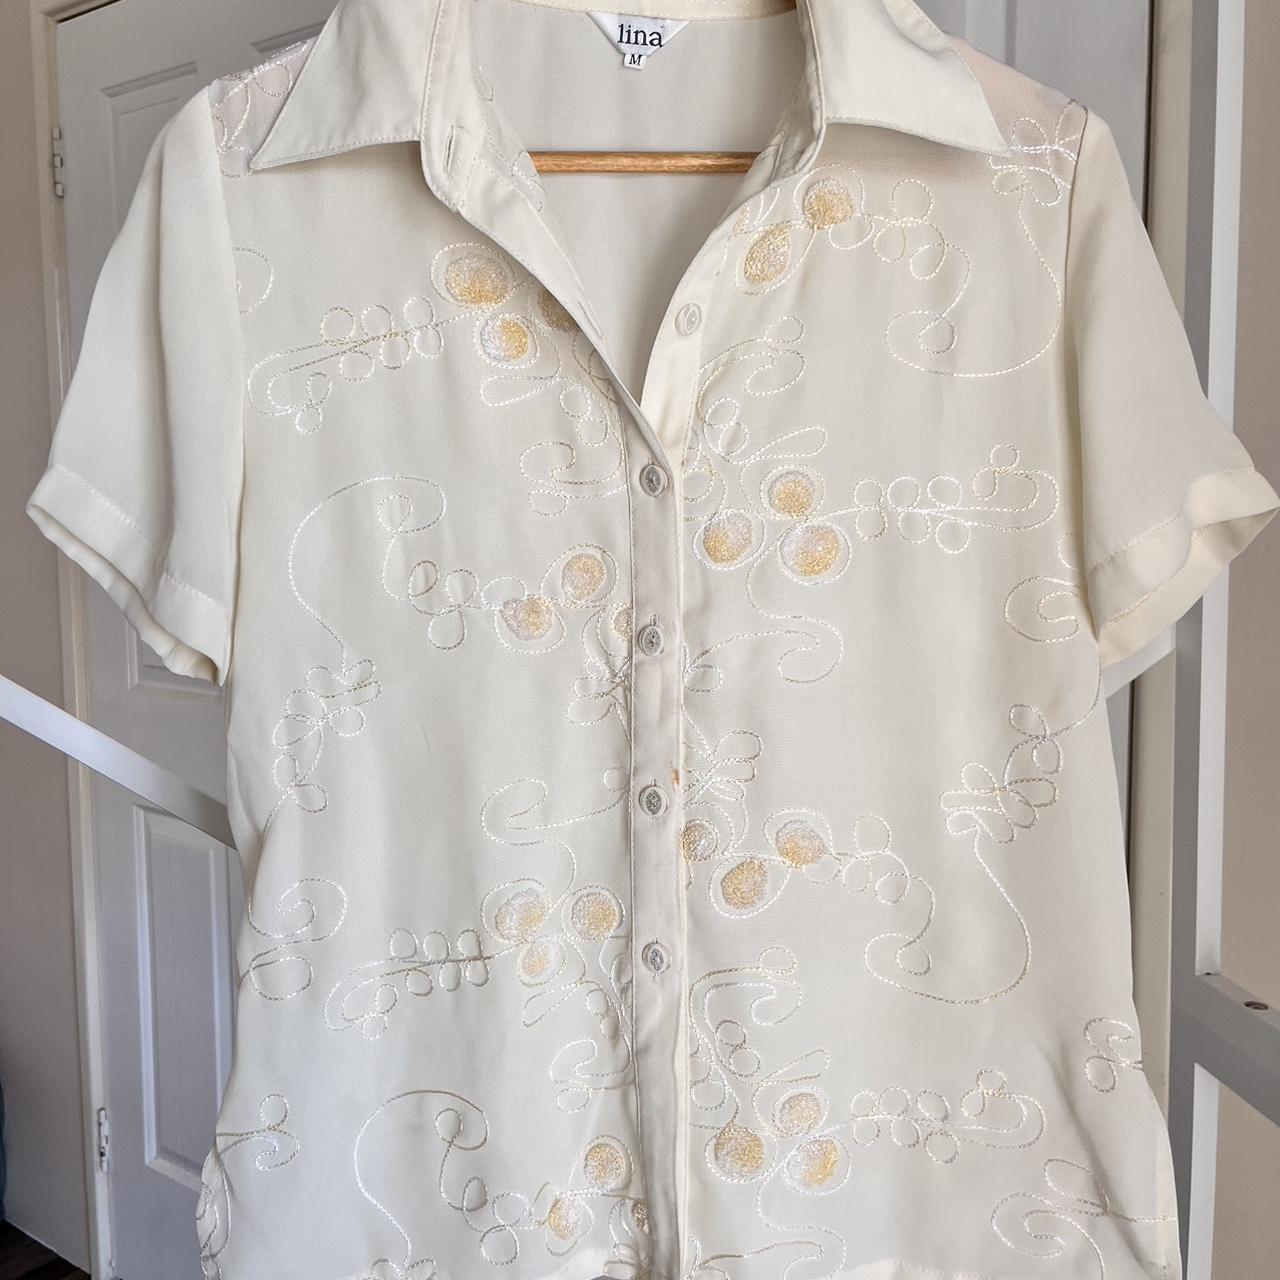 Cute embroidered sheer button up blouse 🌟 Small... - Depop